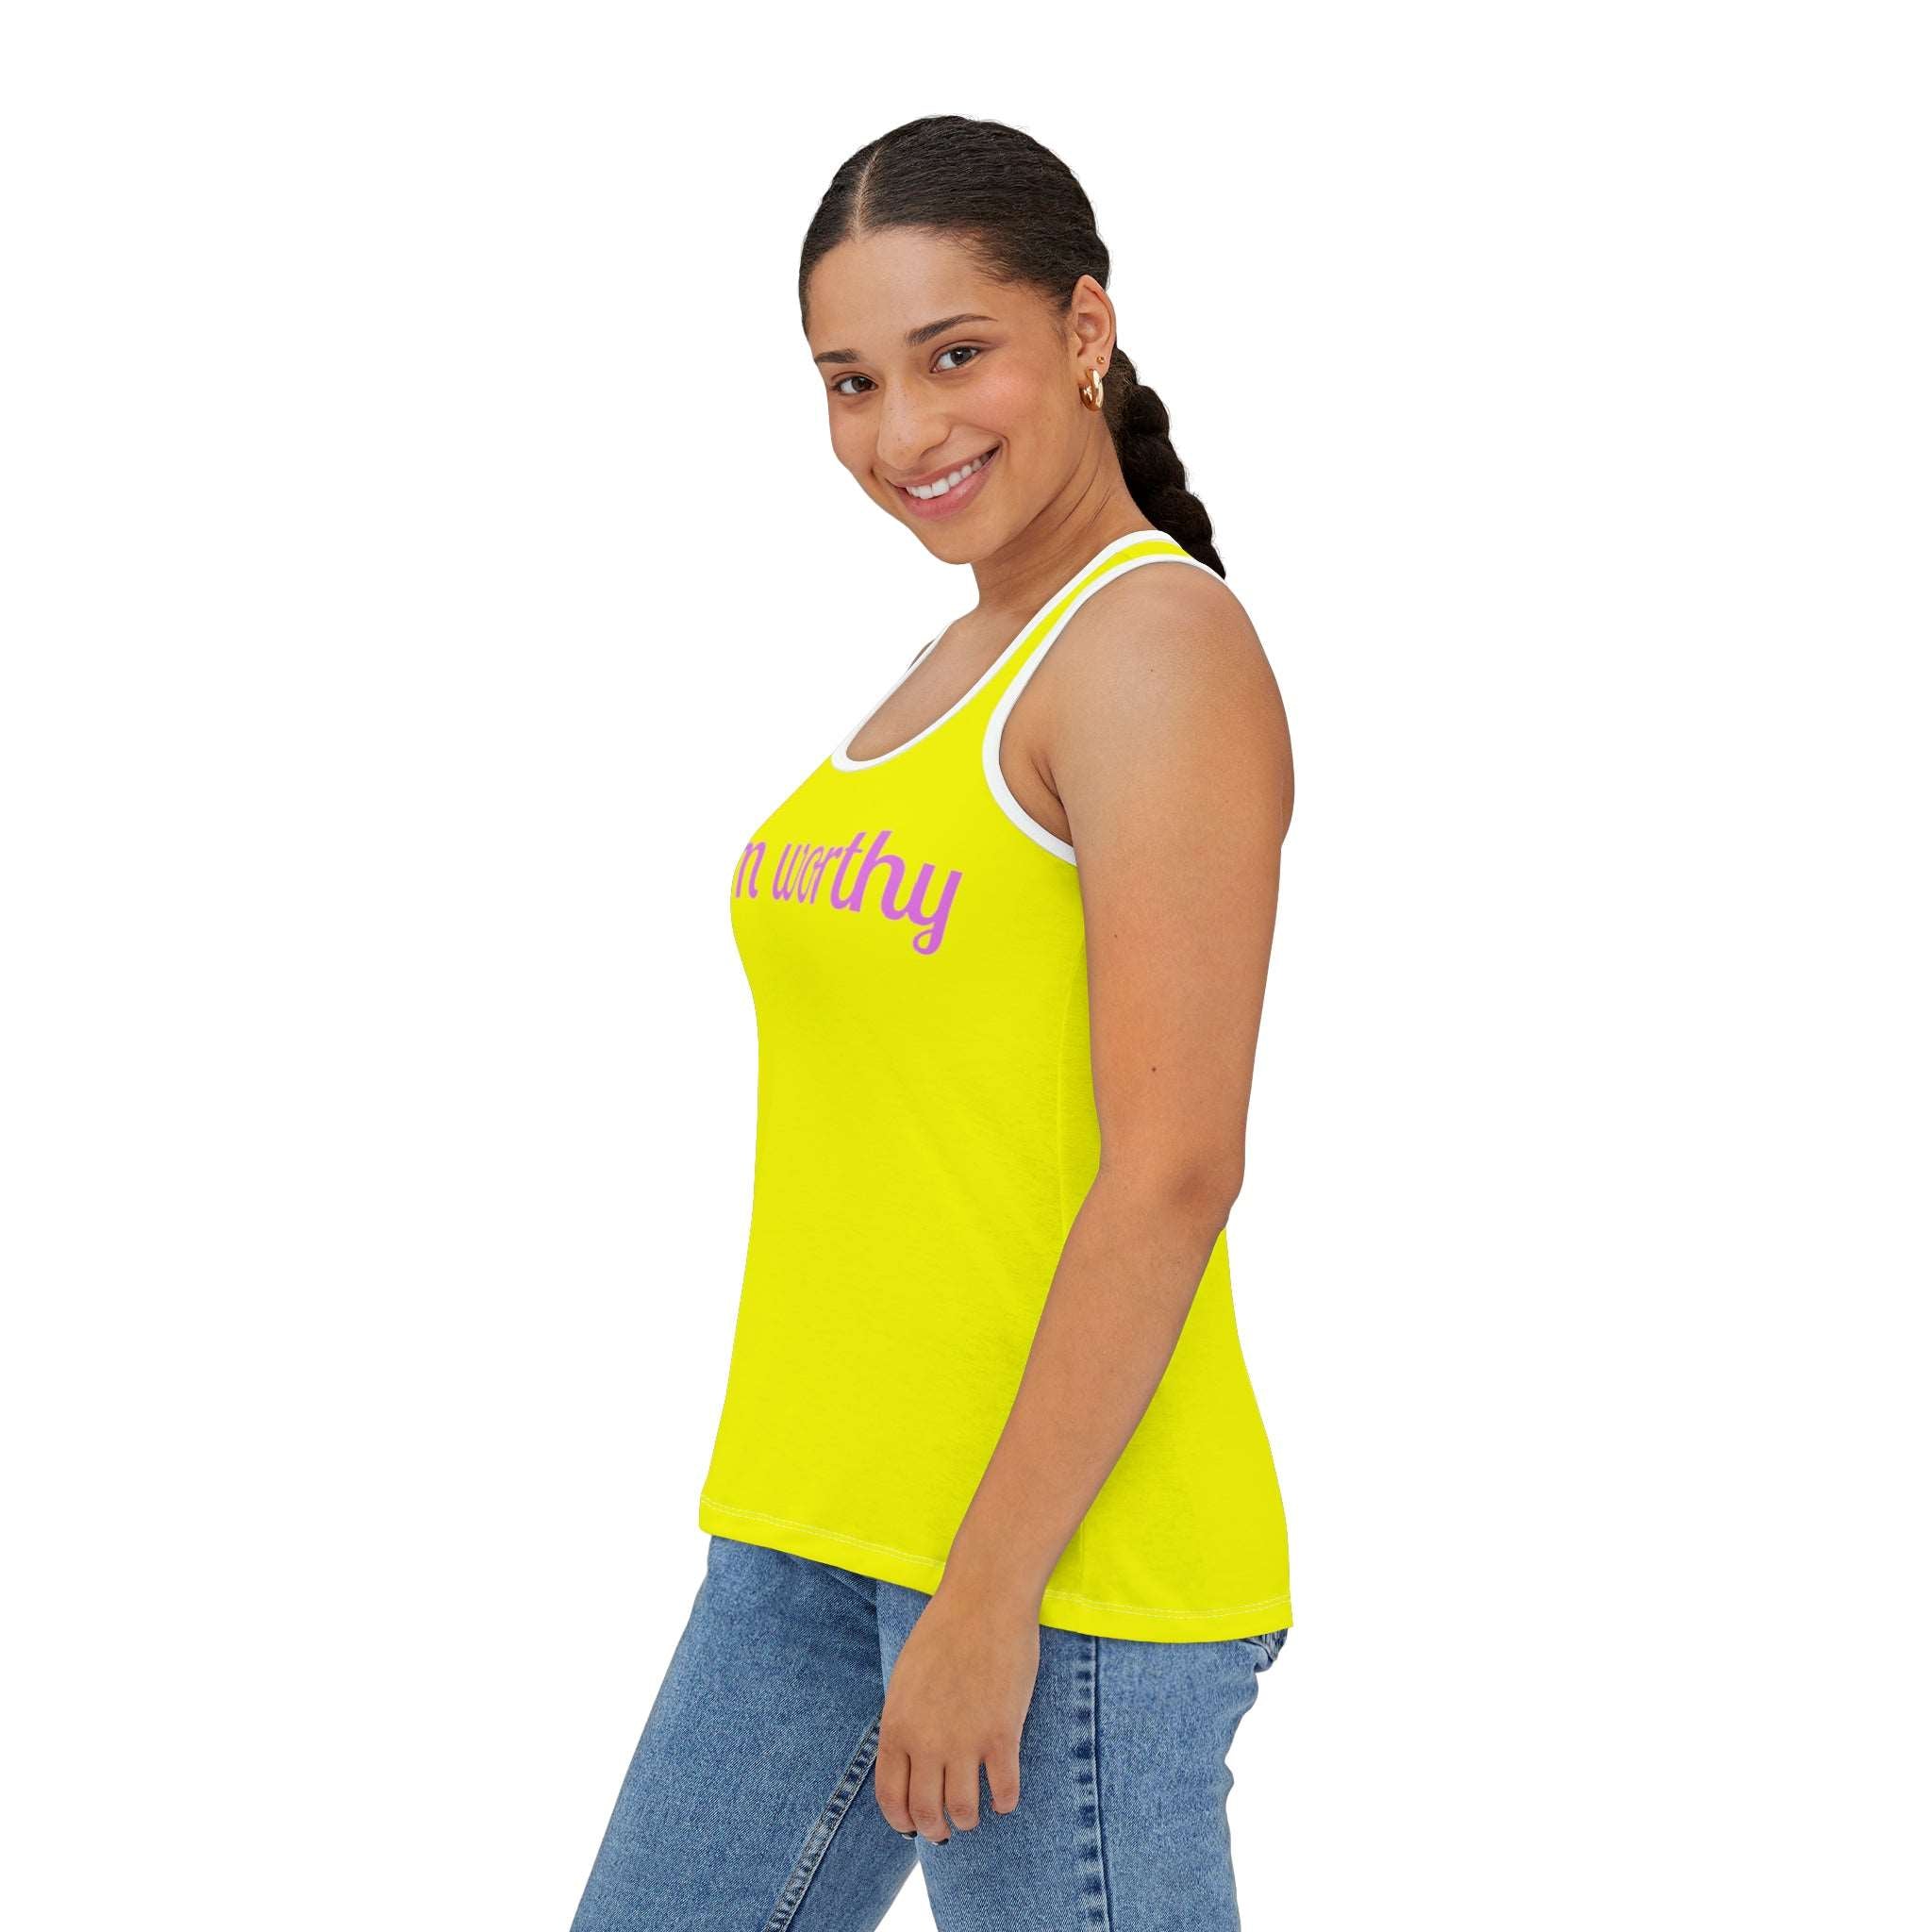 I Am Worthy Racerback: Personalized Comfort & Style White Activewear Athletic Tank Fitness Wear Racerback Racerback Tee Tank Top Women's Tank Workout Gear Yoga Tank Tank Top 4588476071922497972_2048_6cfc104e-08dd-4f38-a743-2190a99e3761 Printify